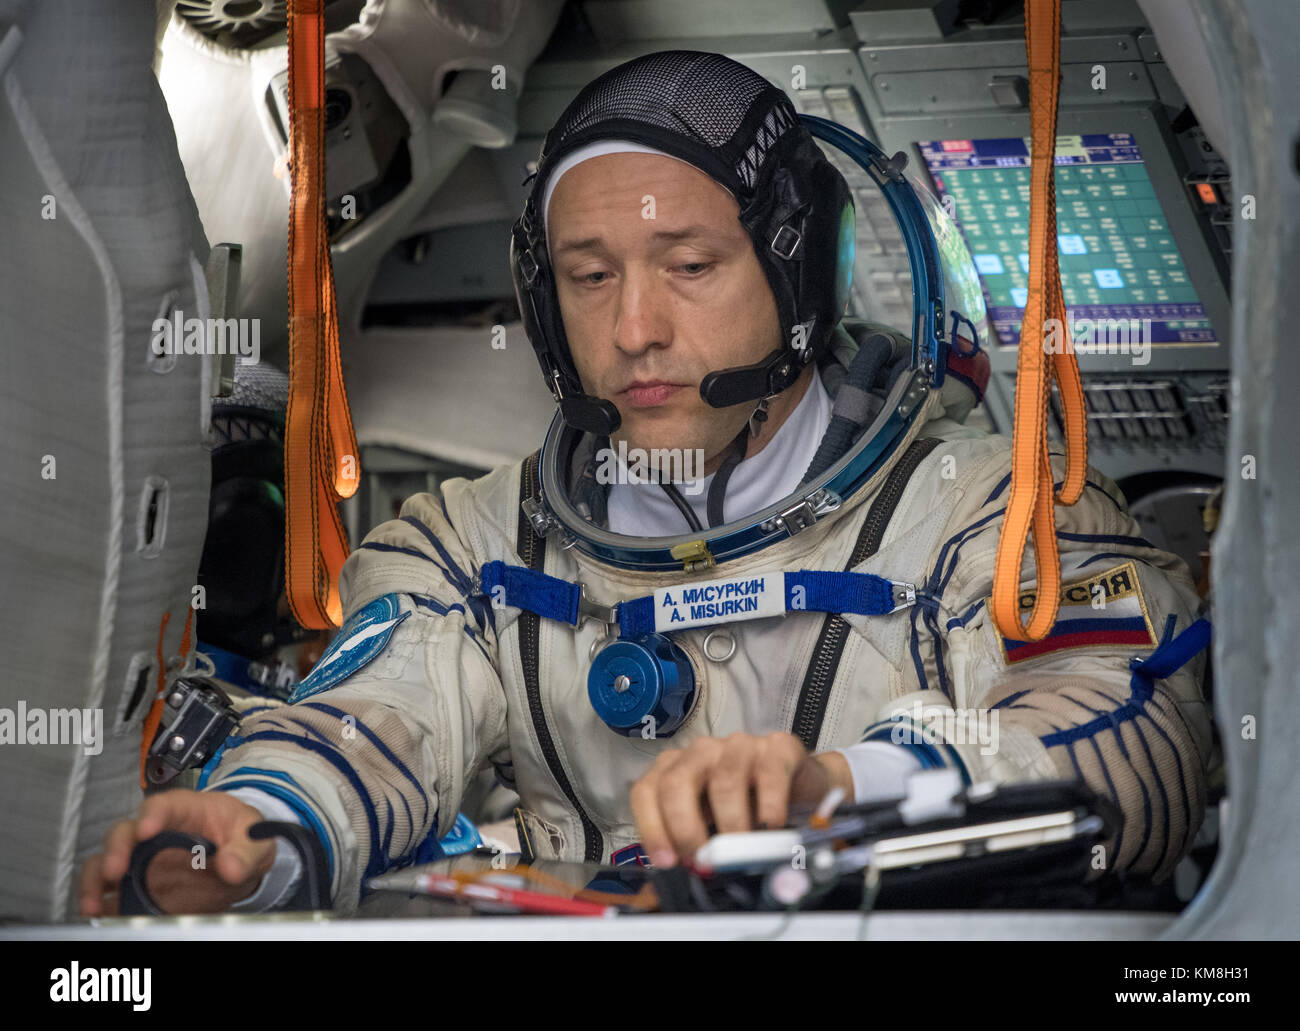 NASA International Space Station (ISS) Expedition 53 prime crew member Russian cosmonaut Alexander Misurkin of Roscosmos starts his Soyuz qualification exams inside the Soyuz simulator prior to the Soyuz MS-06 spacecraft launch at the Gagarin Cosmonaut Training Center August 31, 2017 in Star City, Russia.  (photo by Bill Ingalls  via Planetpix) Stock Photo